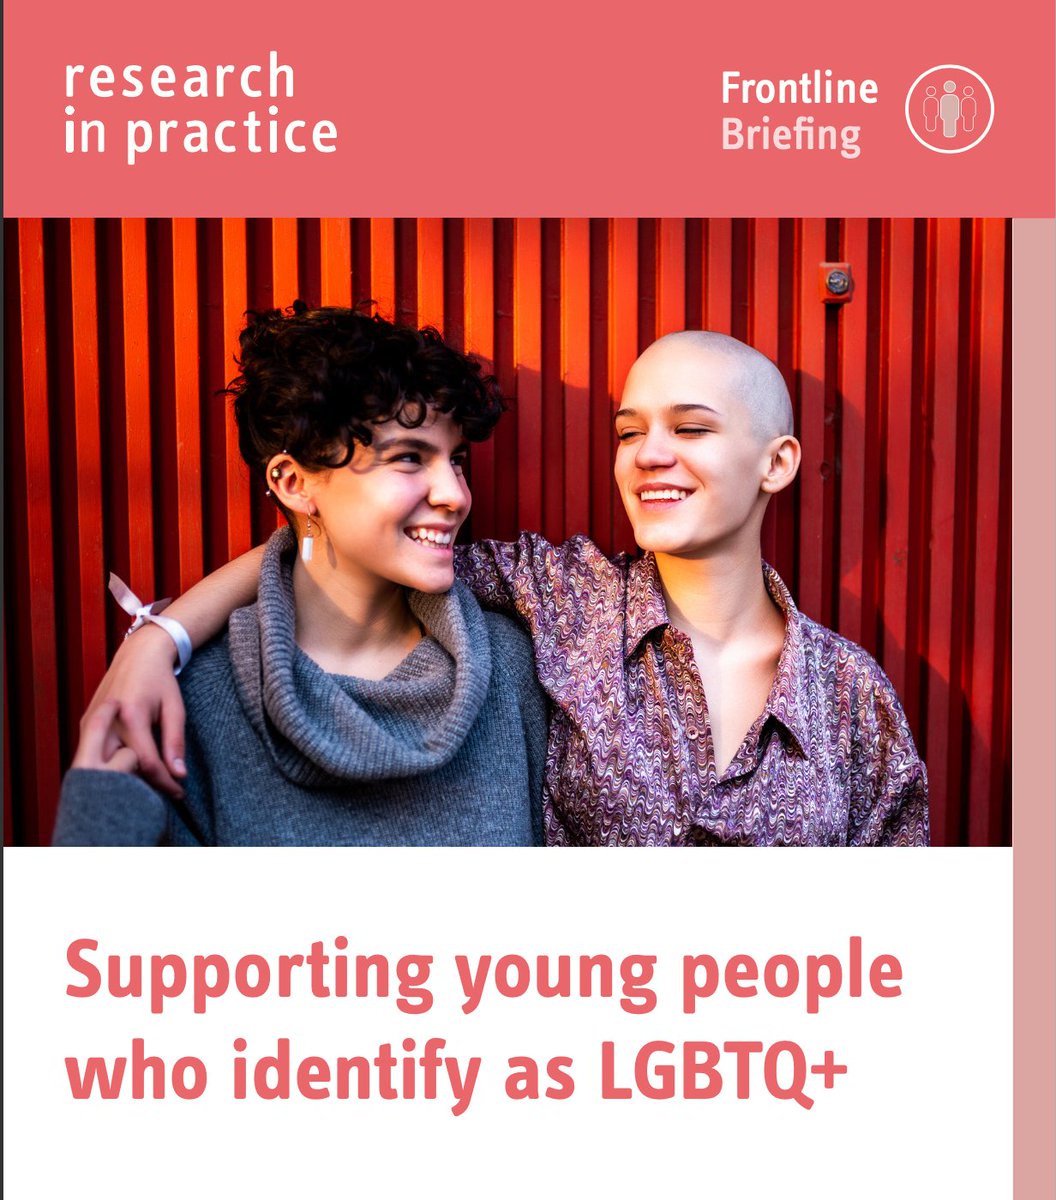 #LGBTHM23 - Do you work with young people? Check out this free resource & blog, published by @researchIP . The blog explores what we mean by working inclusively. The Frontline Briefing looks at how professionals can become an LGBTQ+ ally. researchinpractice.org.uk/children/news-…